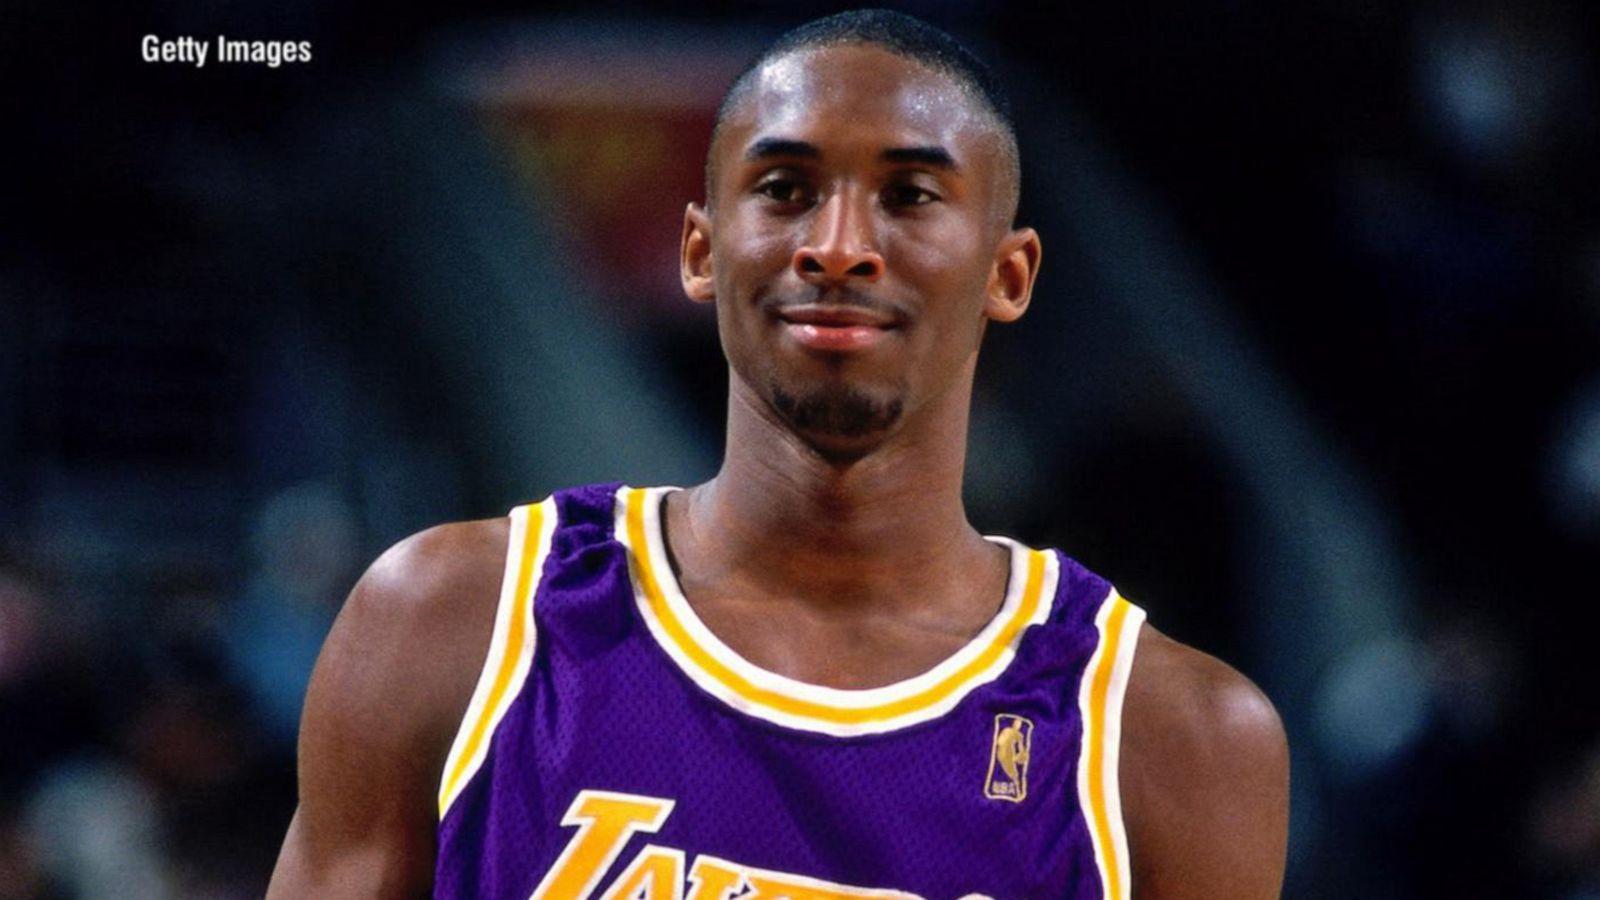 Kobe Bryant, daughter among 9 dead in helicopter crash in Southern